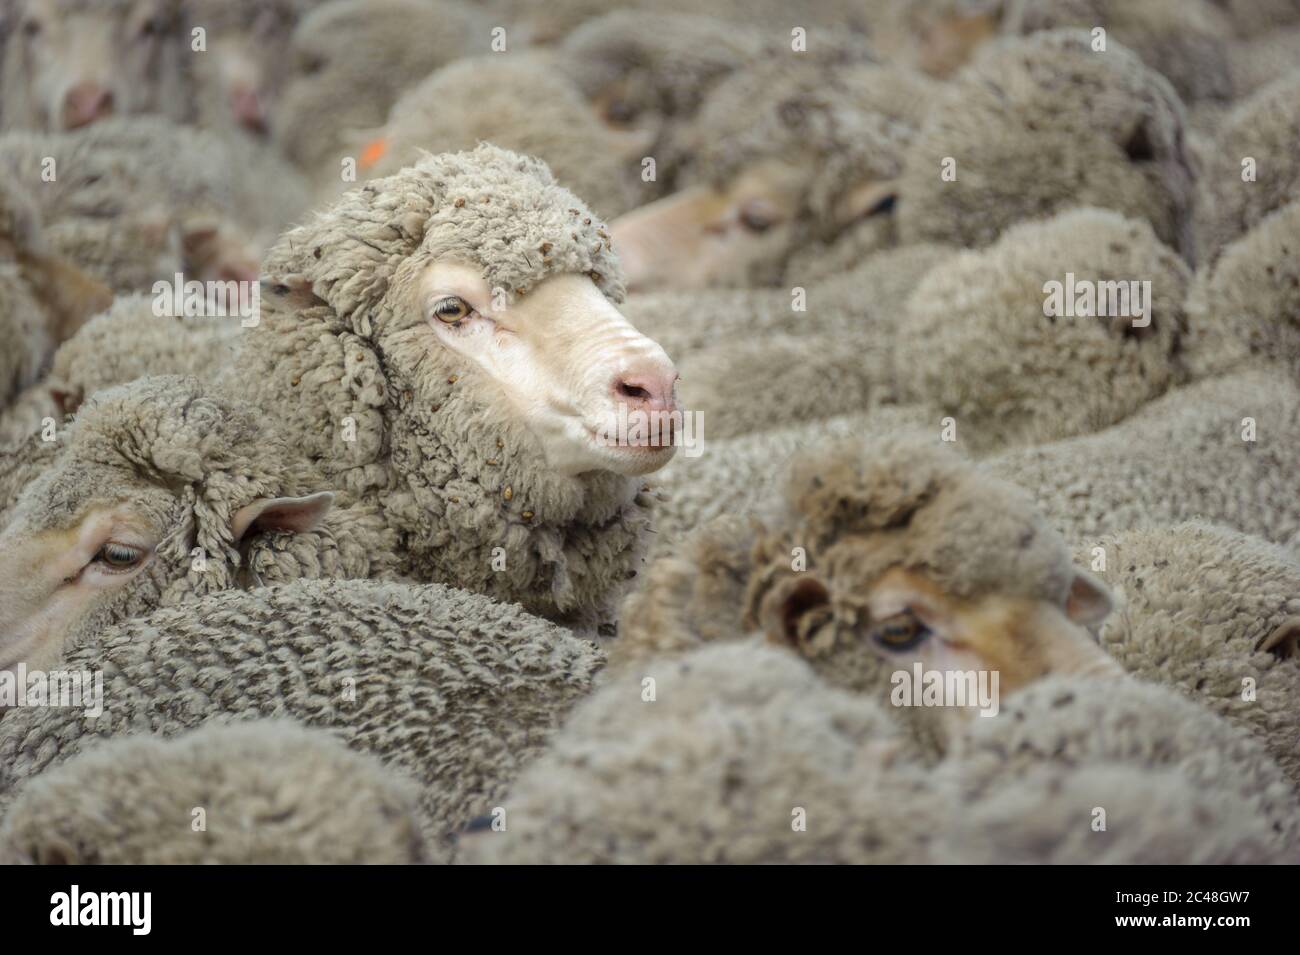 Merino ewes crowded in a shearing shed pen waiting to be shorn by the shearers at Laura Station, New South Wales in Australia. Stock Photo